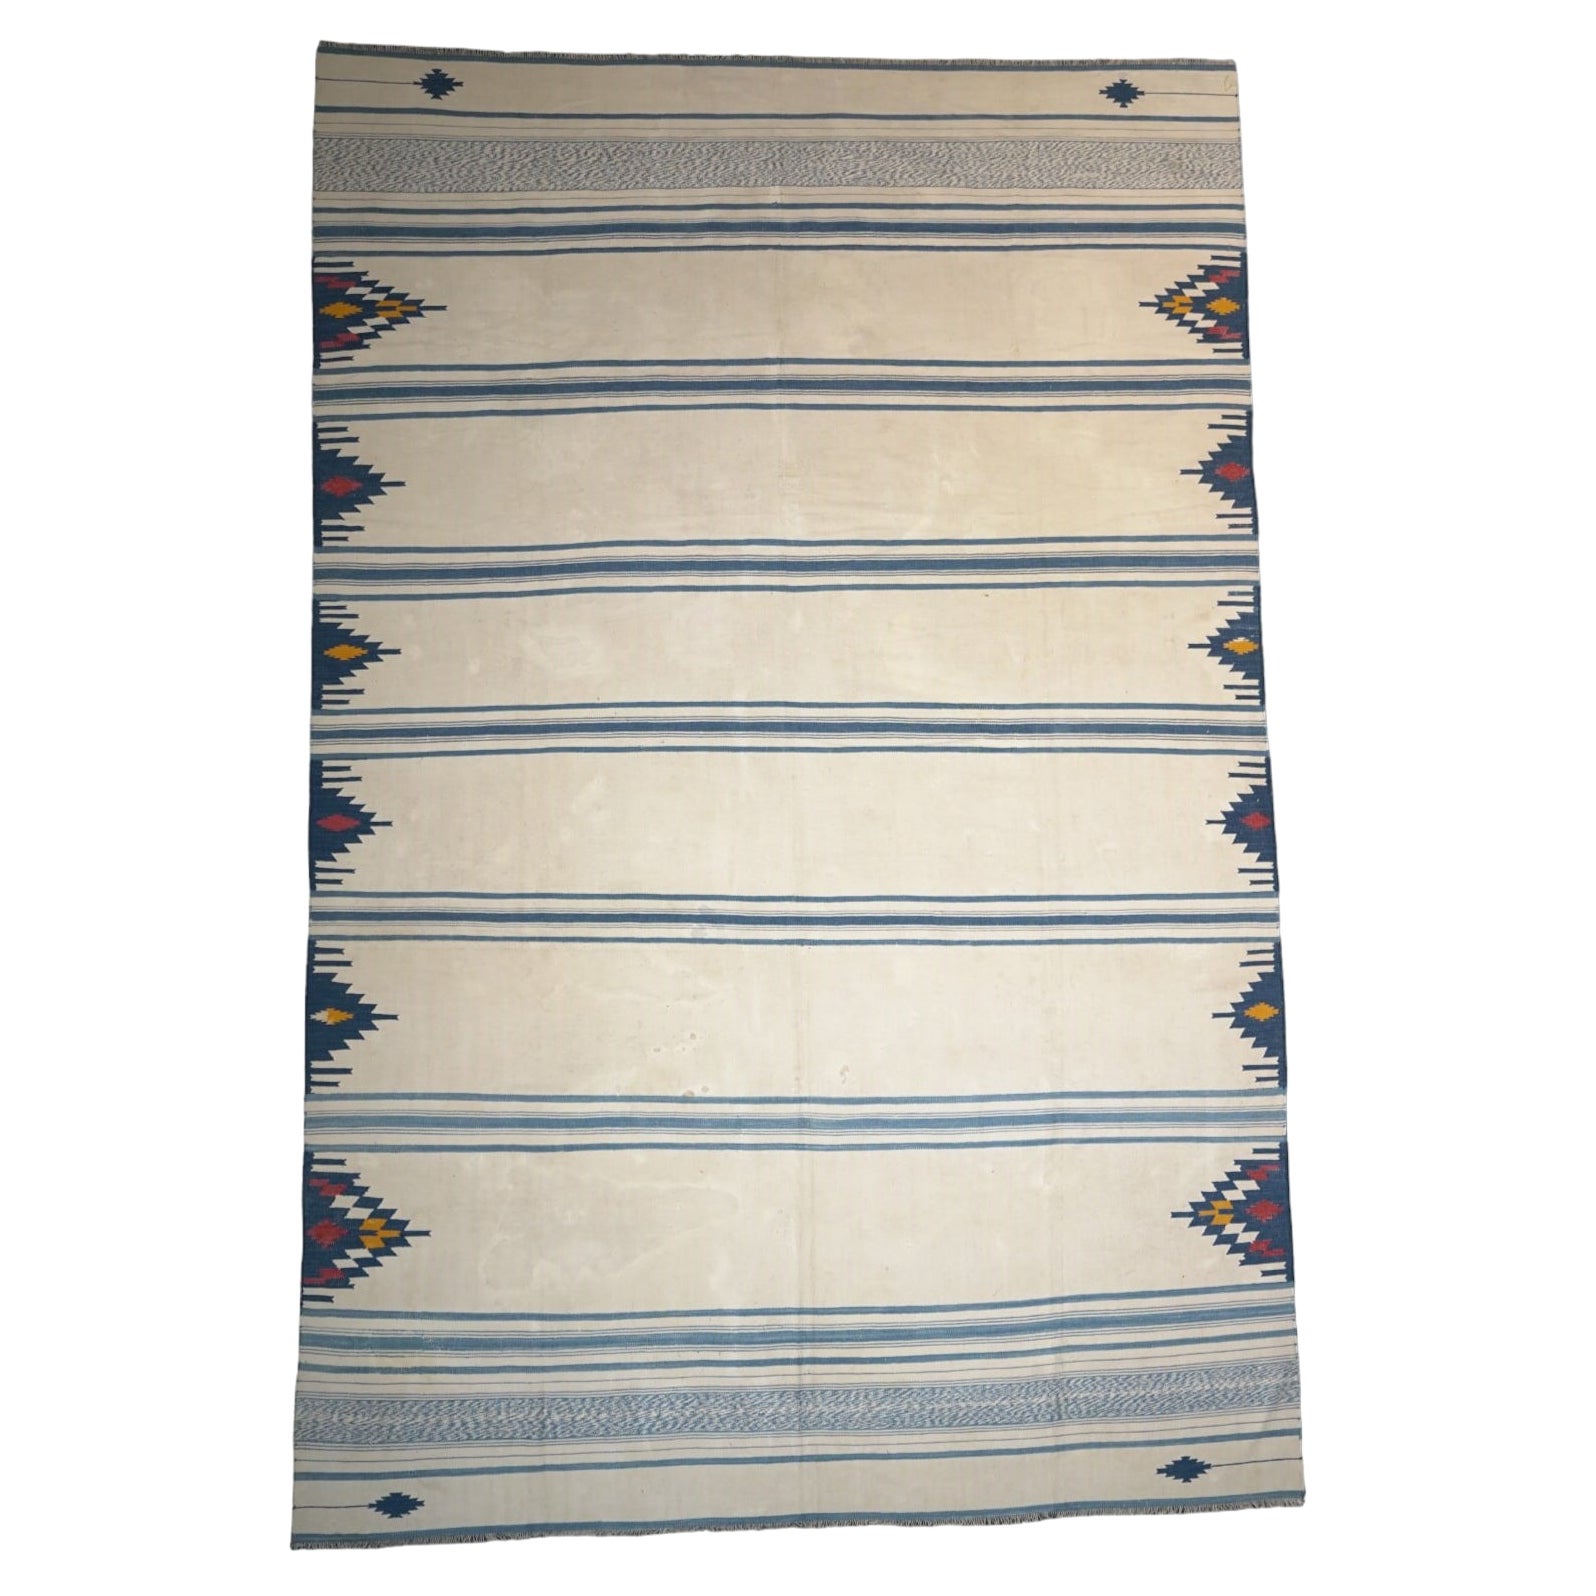 Vintage Dhurrie Rug in Blue and Beigewith Stripes, from Rug & Kilim For Sale